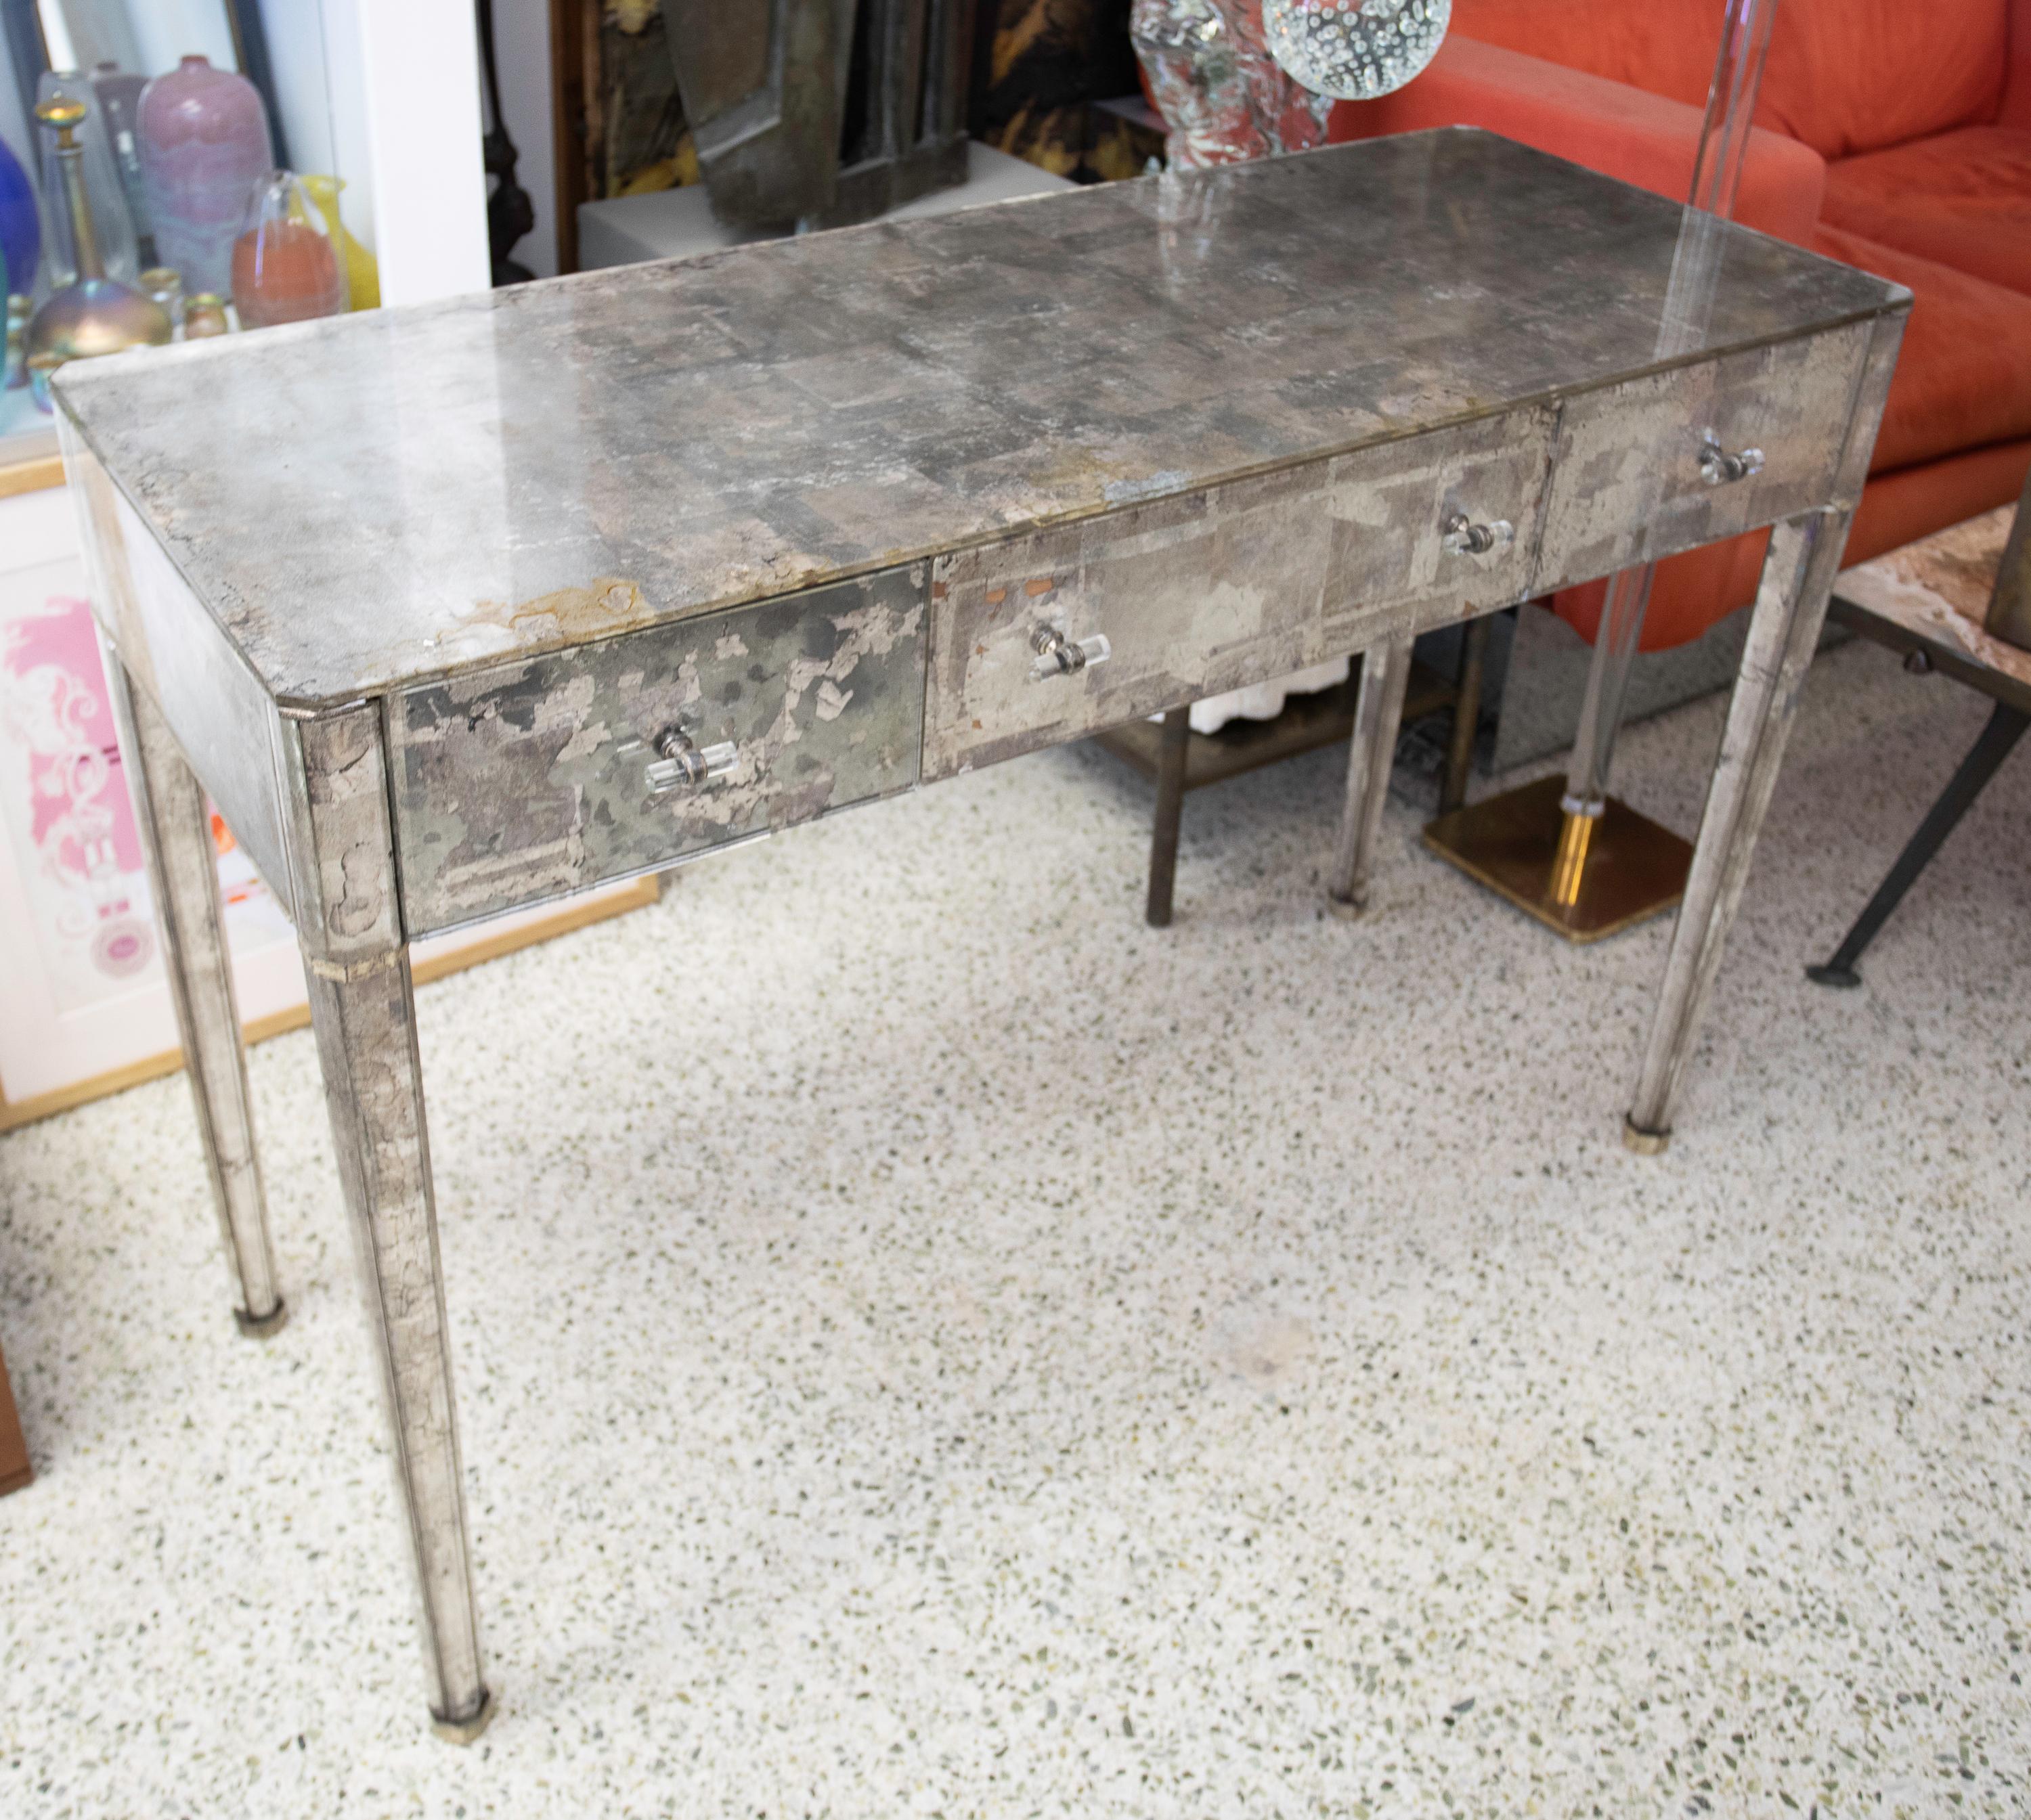 L. Marchand Eglomise Art Deco Mirrored Desk/Table/Vanity In Good Condition For Sale In West Palm Beach, FL